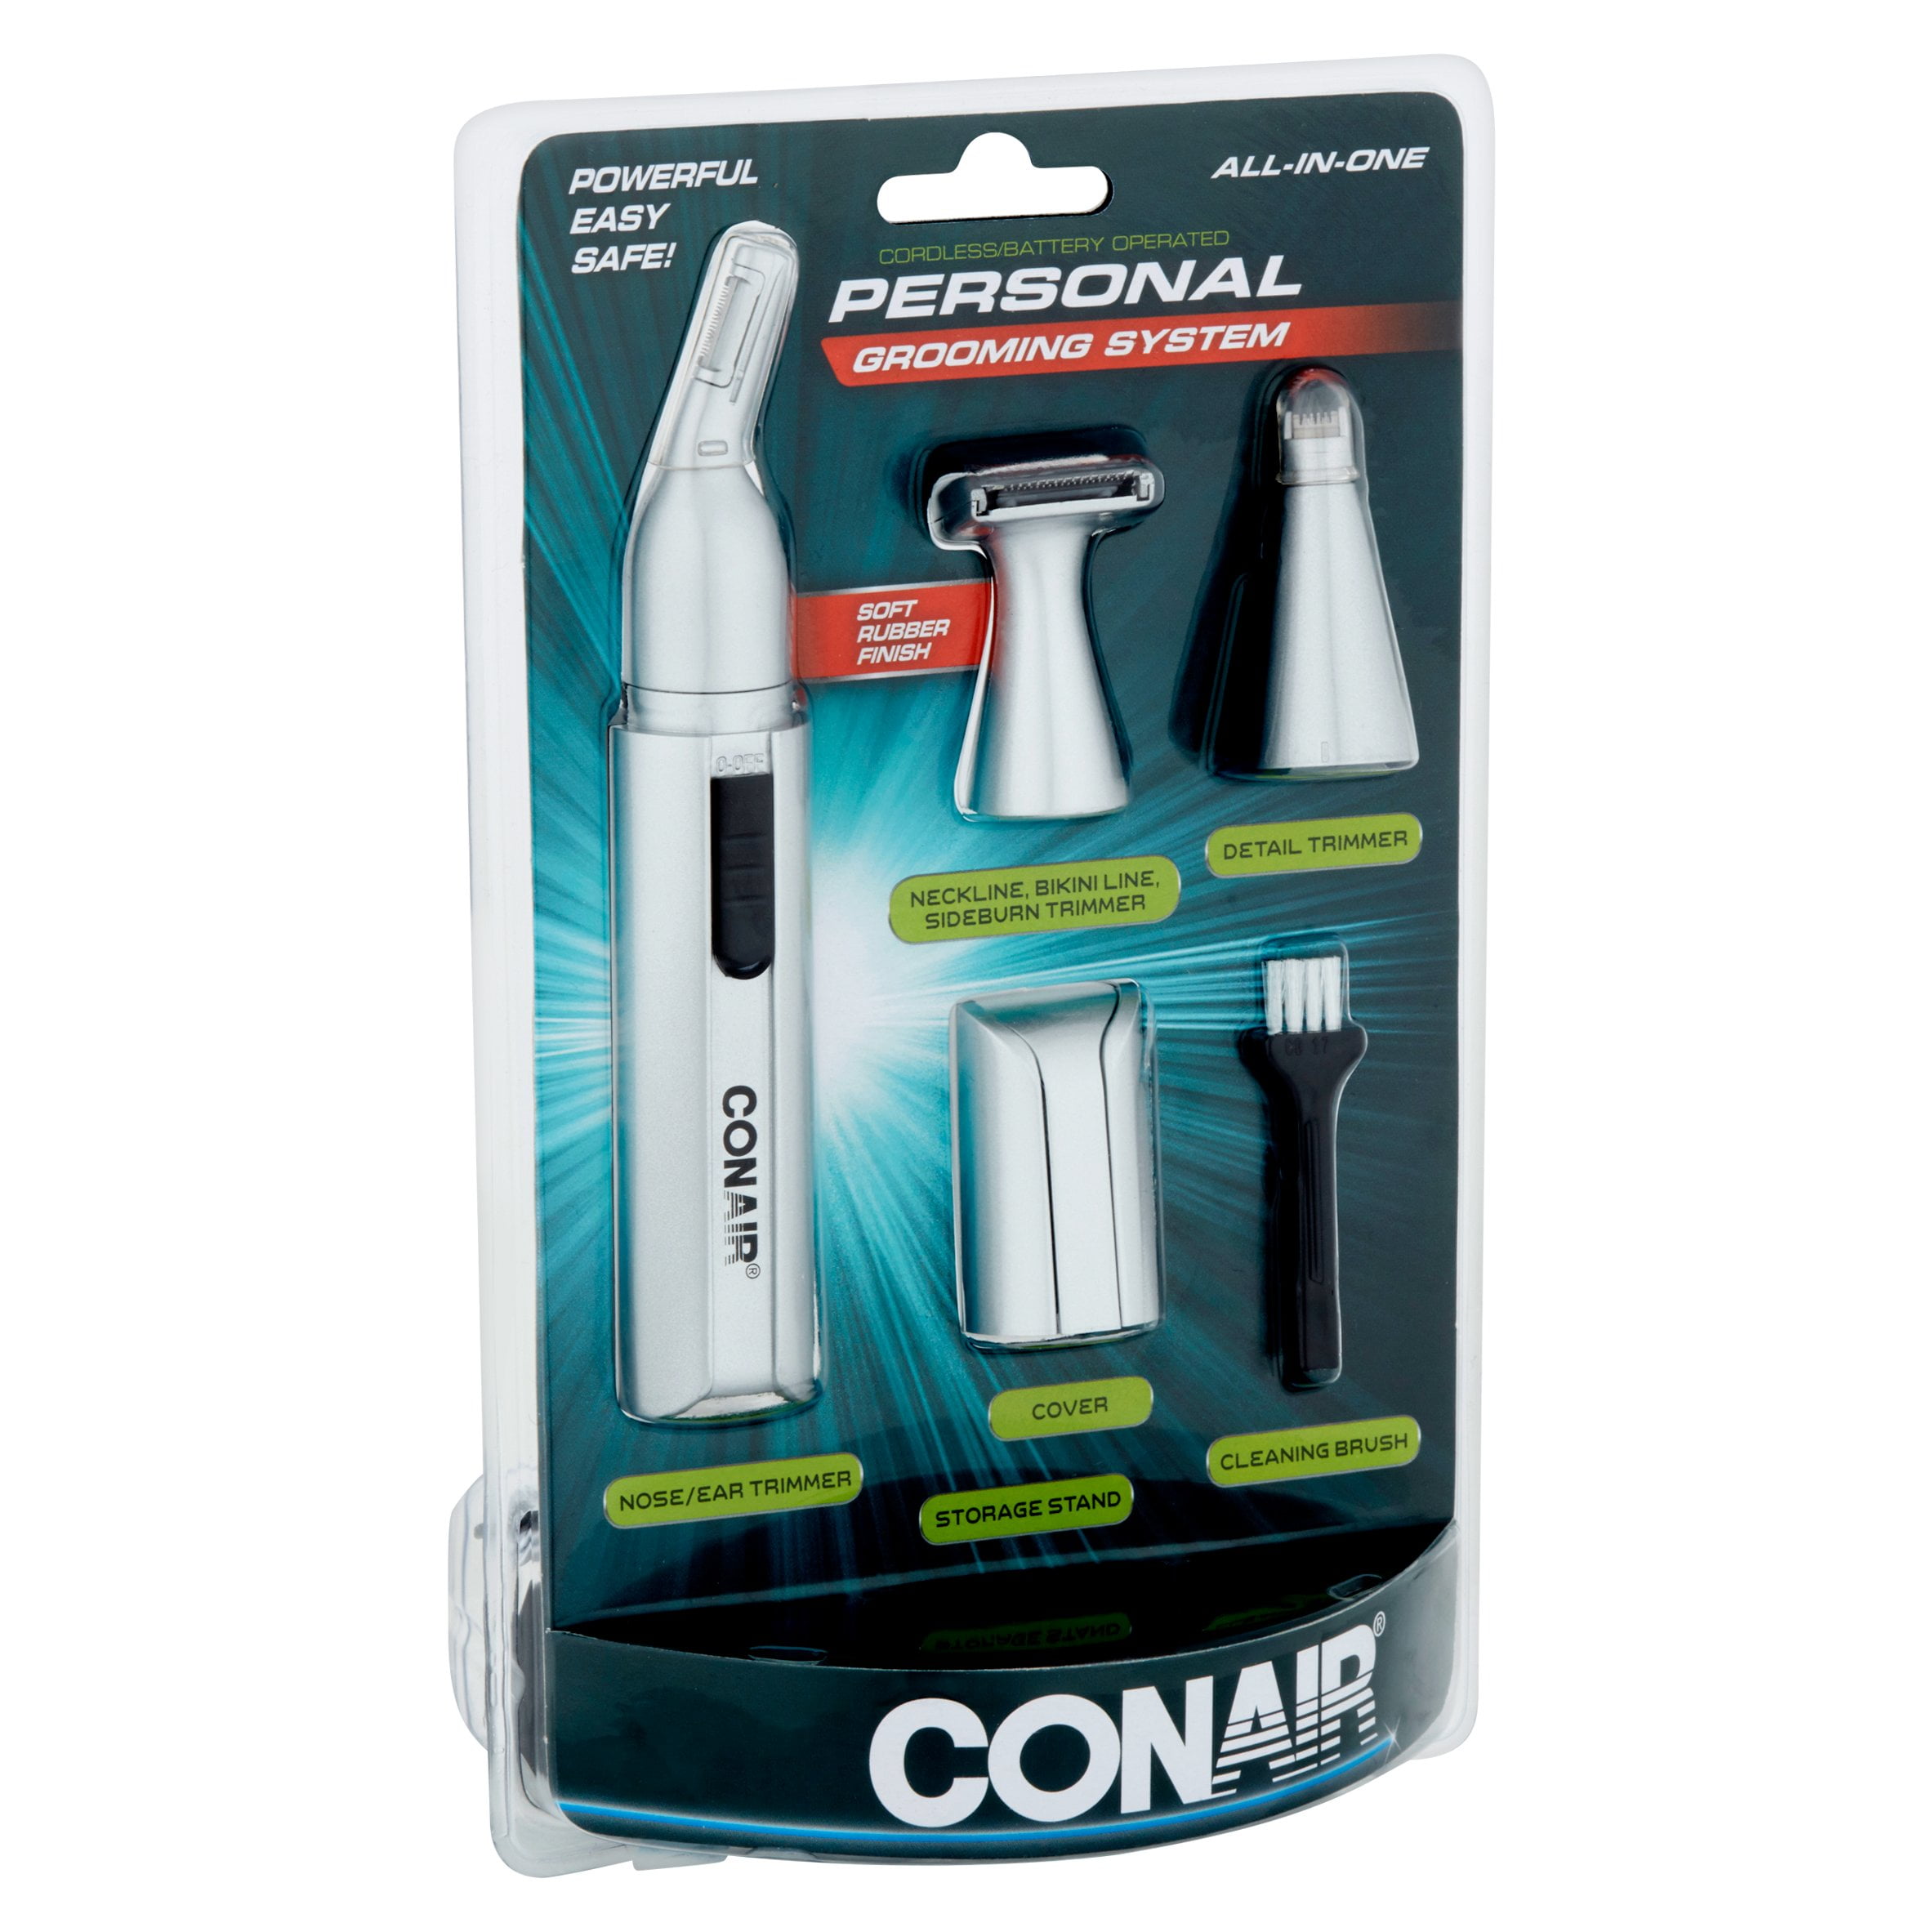 conair personal grooming system